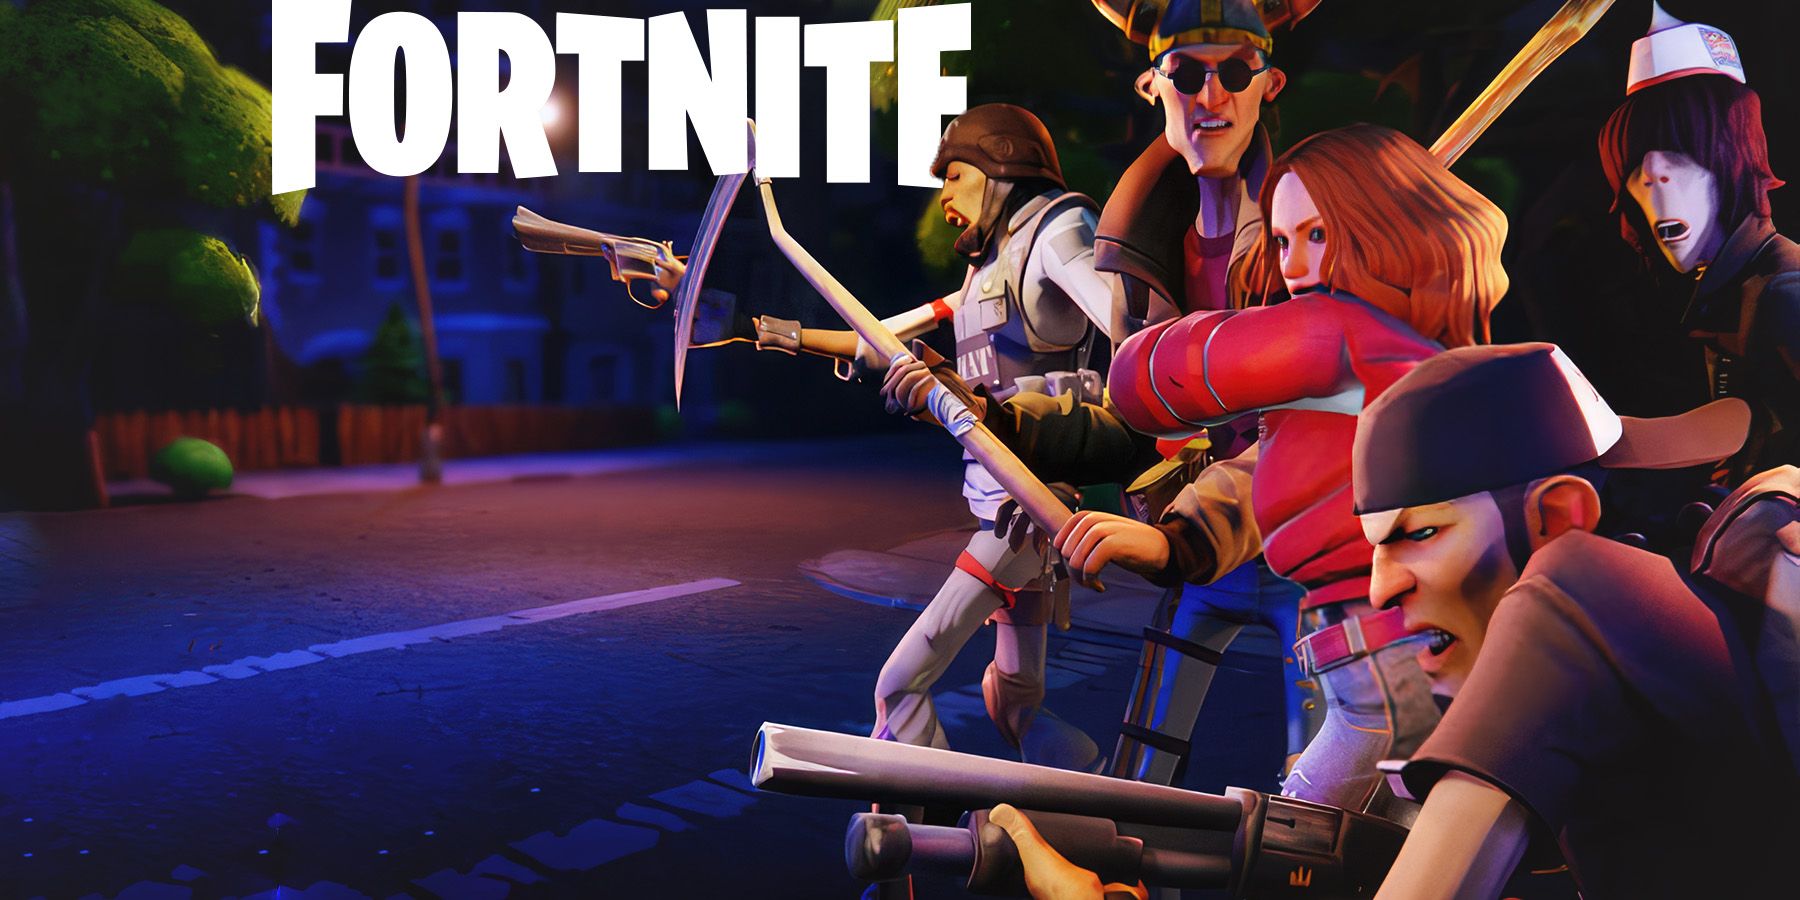 Fortnite angry characters nighttime street with white game logo composite